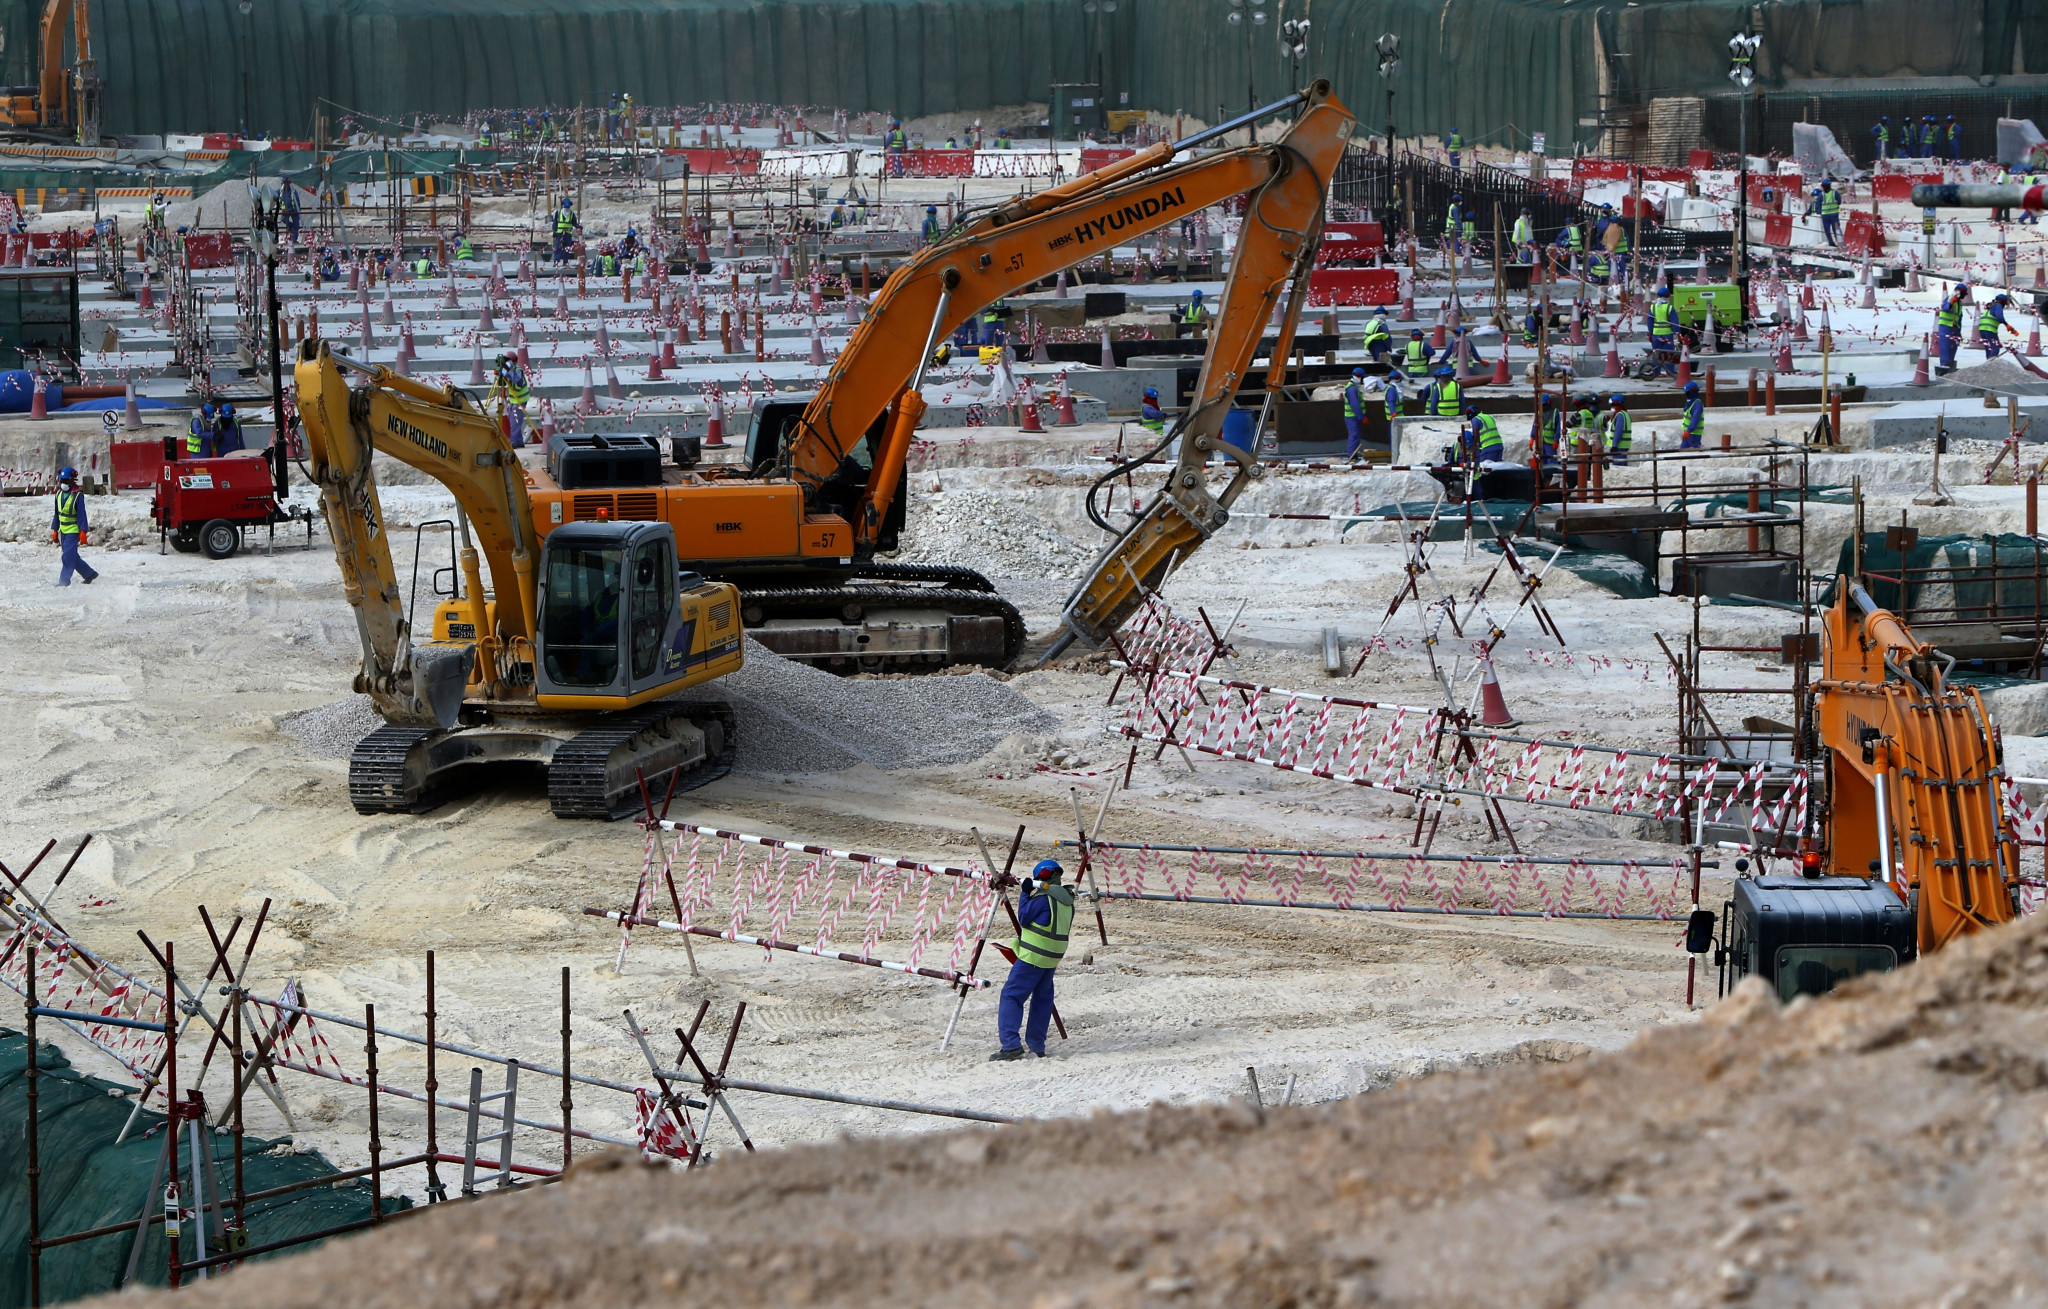 Qatar's treatment of migrant workers has been one of the defining issues of the World Cup ©Getty Images